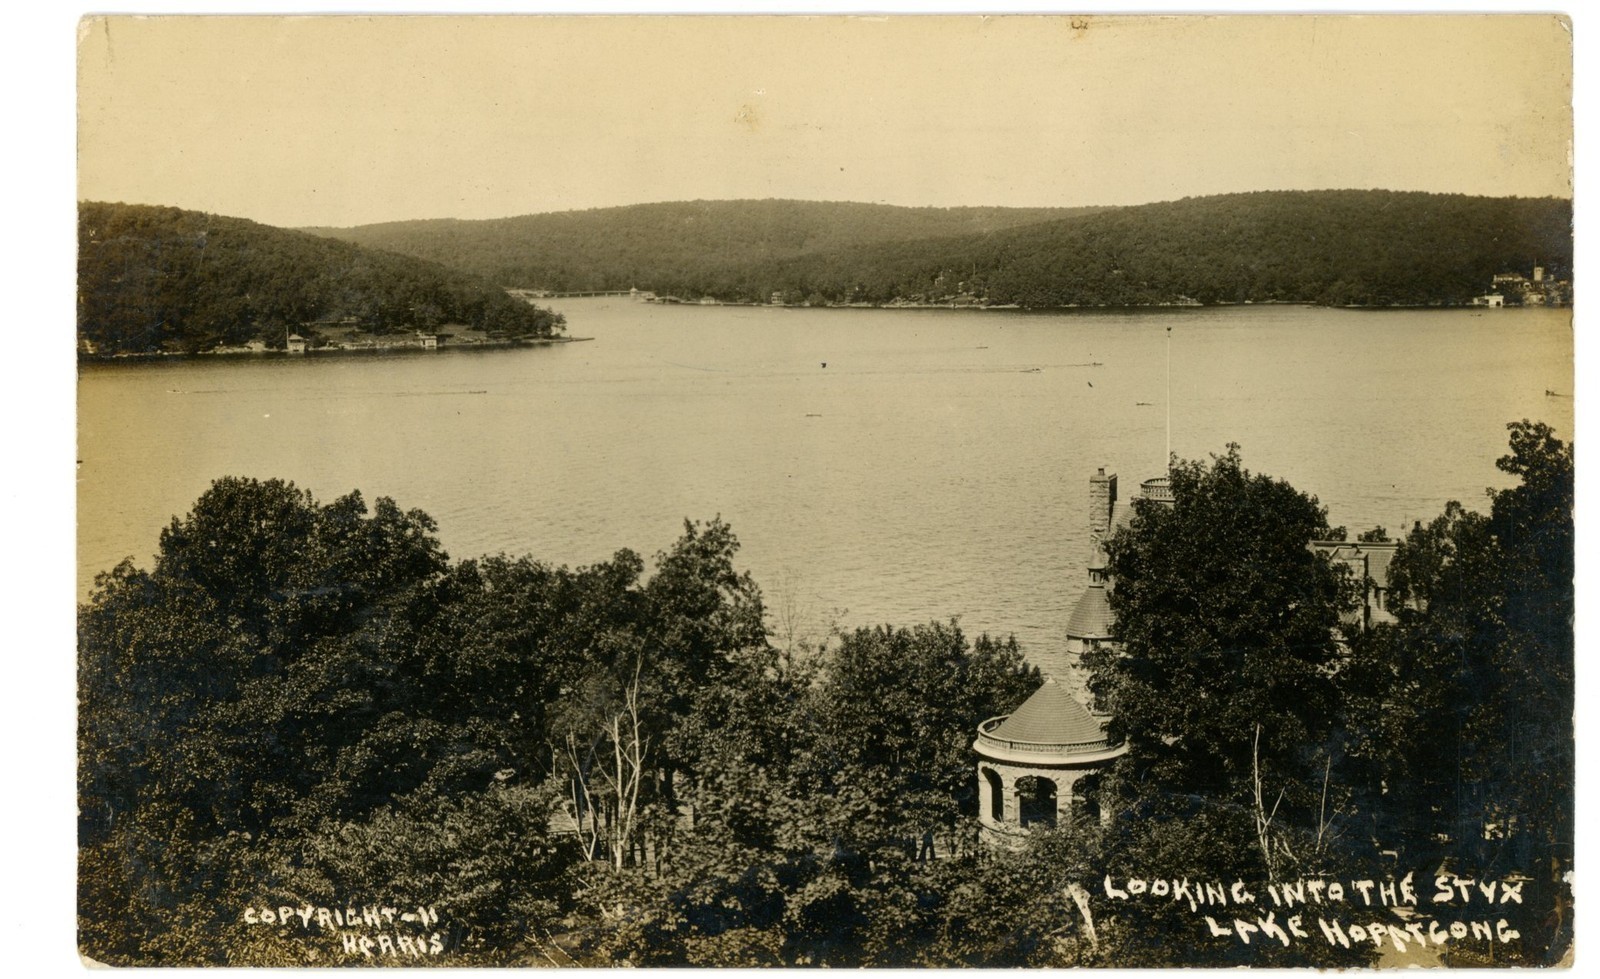 Lake Hopatcong - view of lake from hotel - c 1910